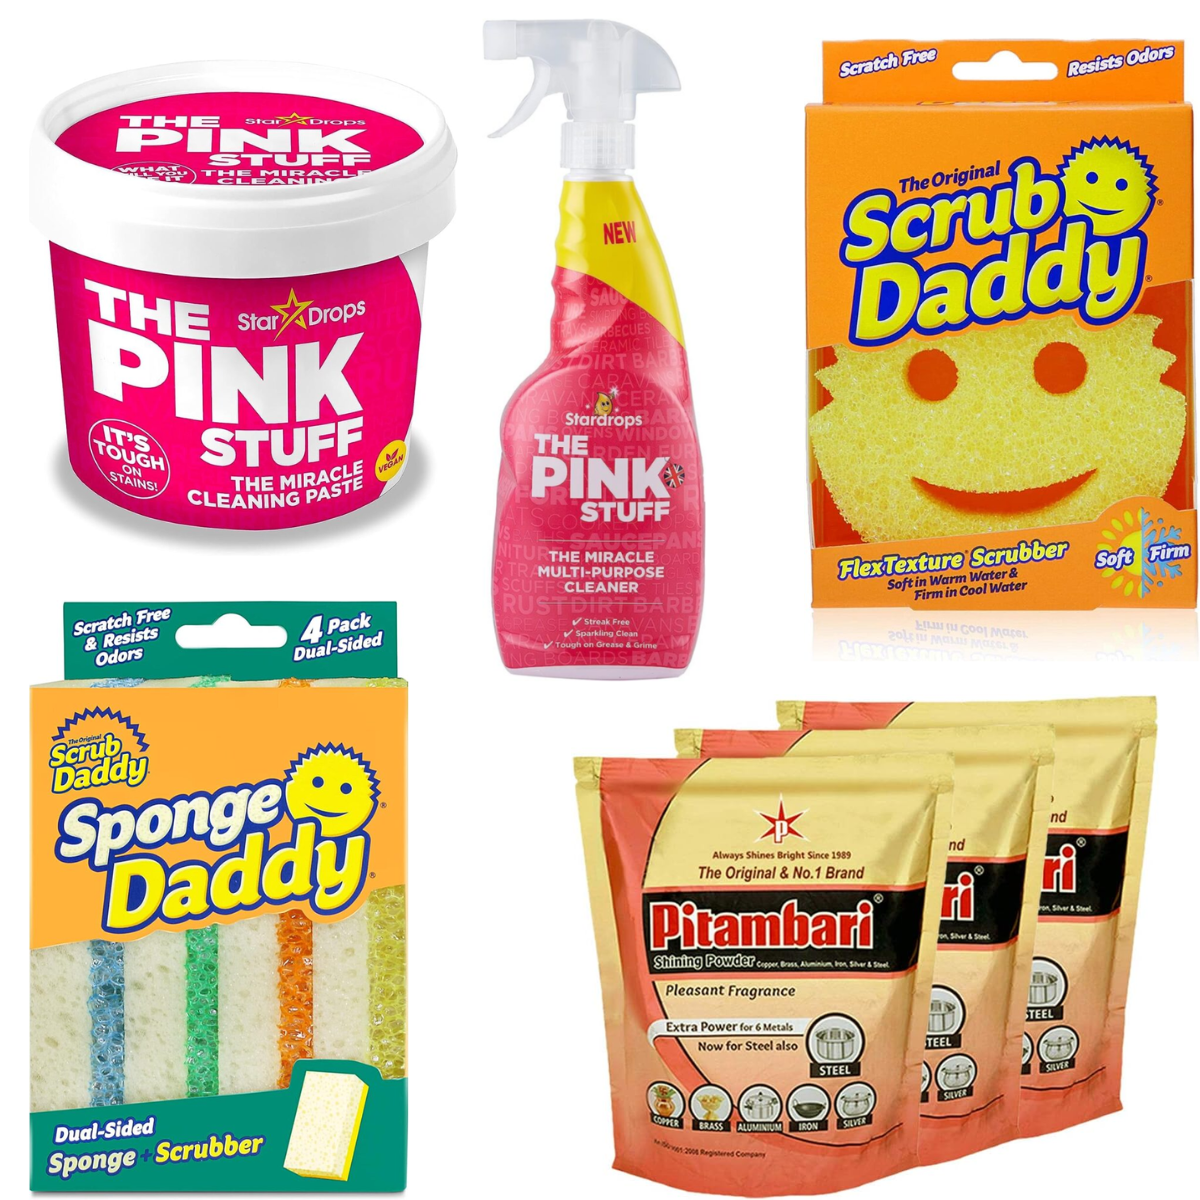 Pink Stuff Paste for $4+, Scrub Daddy Sponges for $3+, Pitambari Powder  for 12+